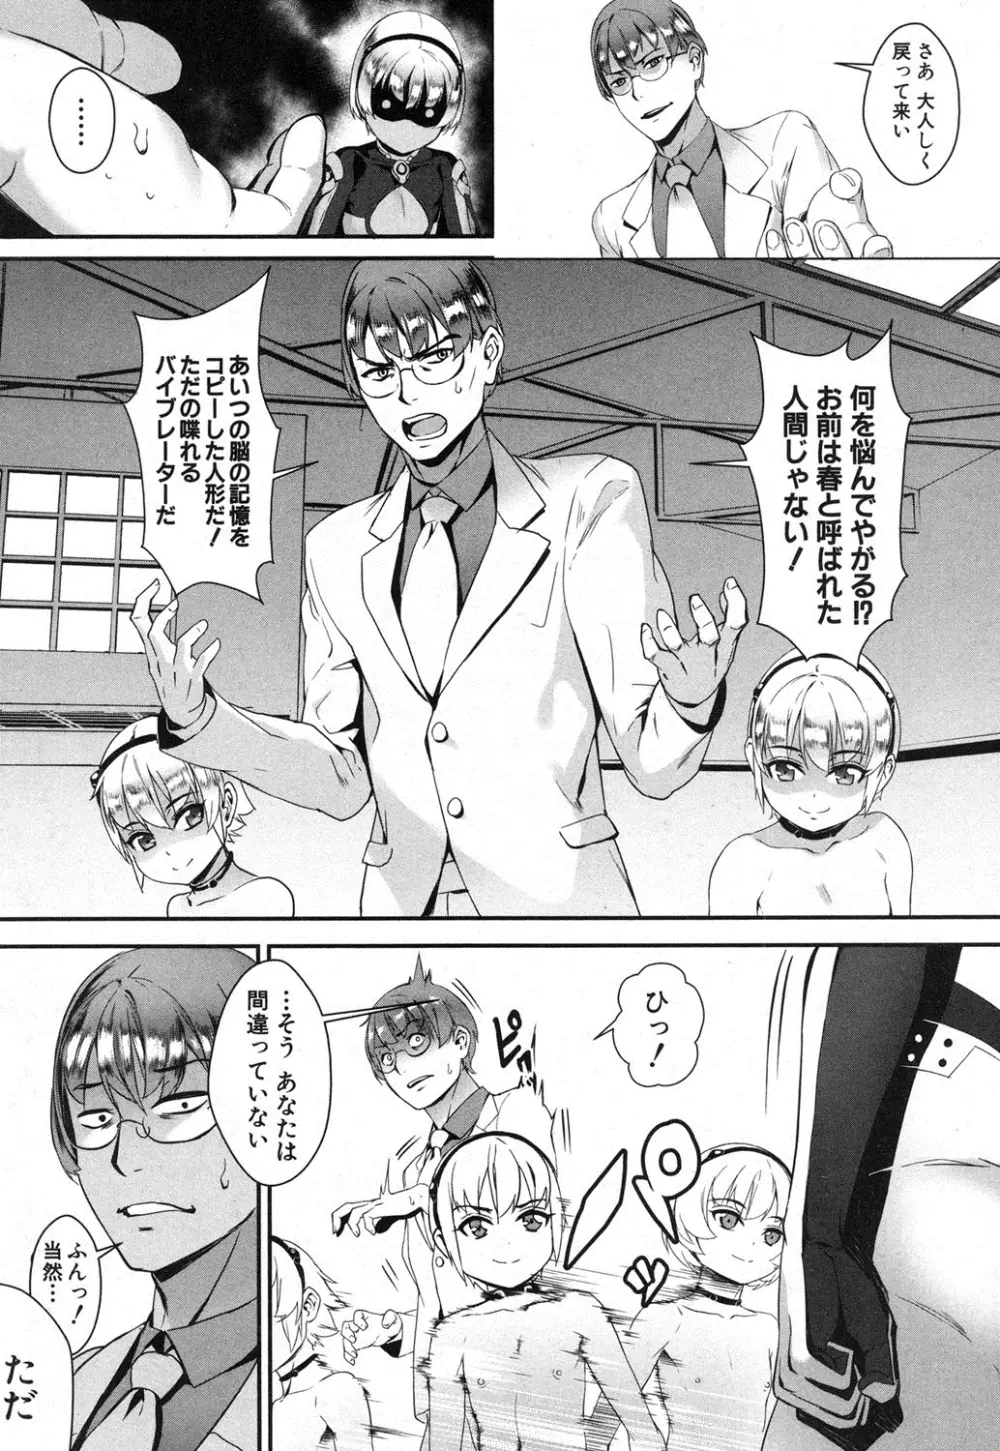 T.F.S 第1-4話 + 御負け PV Page.131